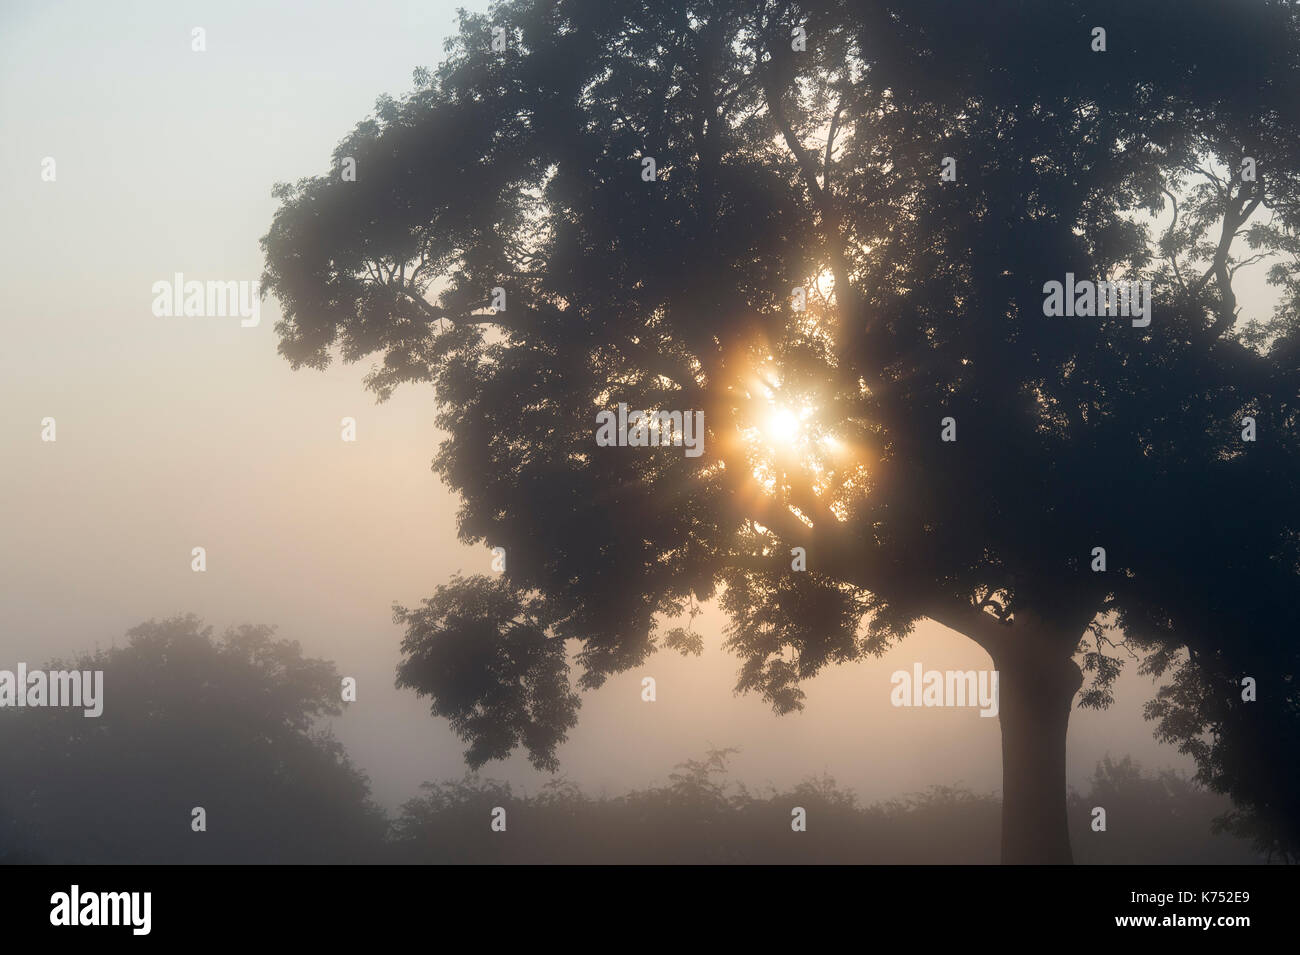 Foggy misty morning sunrise tree silhouette in the Oxfordshire countryside. UK Stock Photo